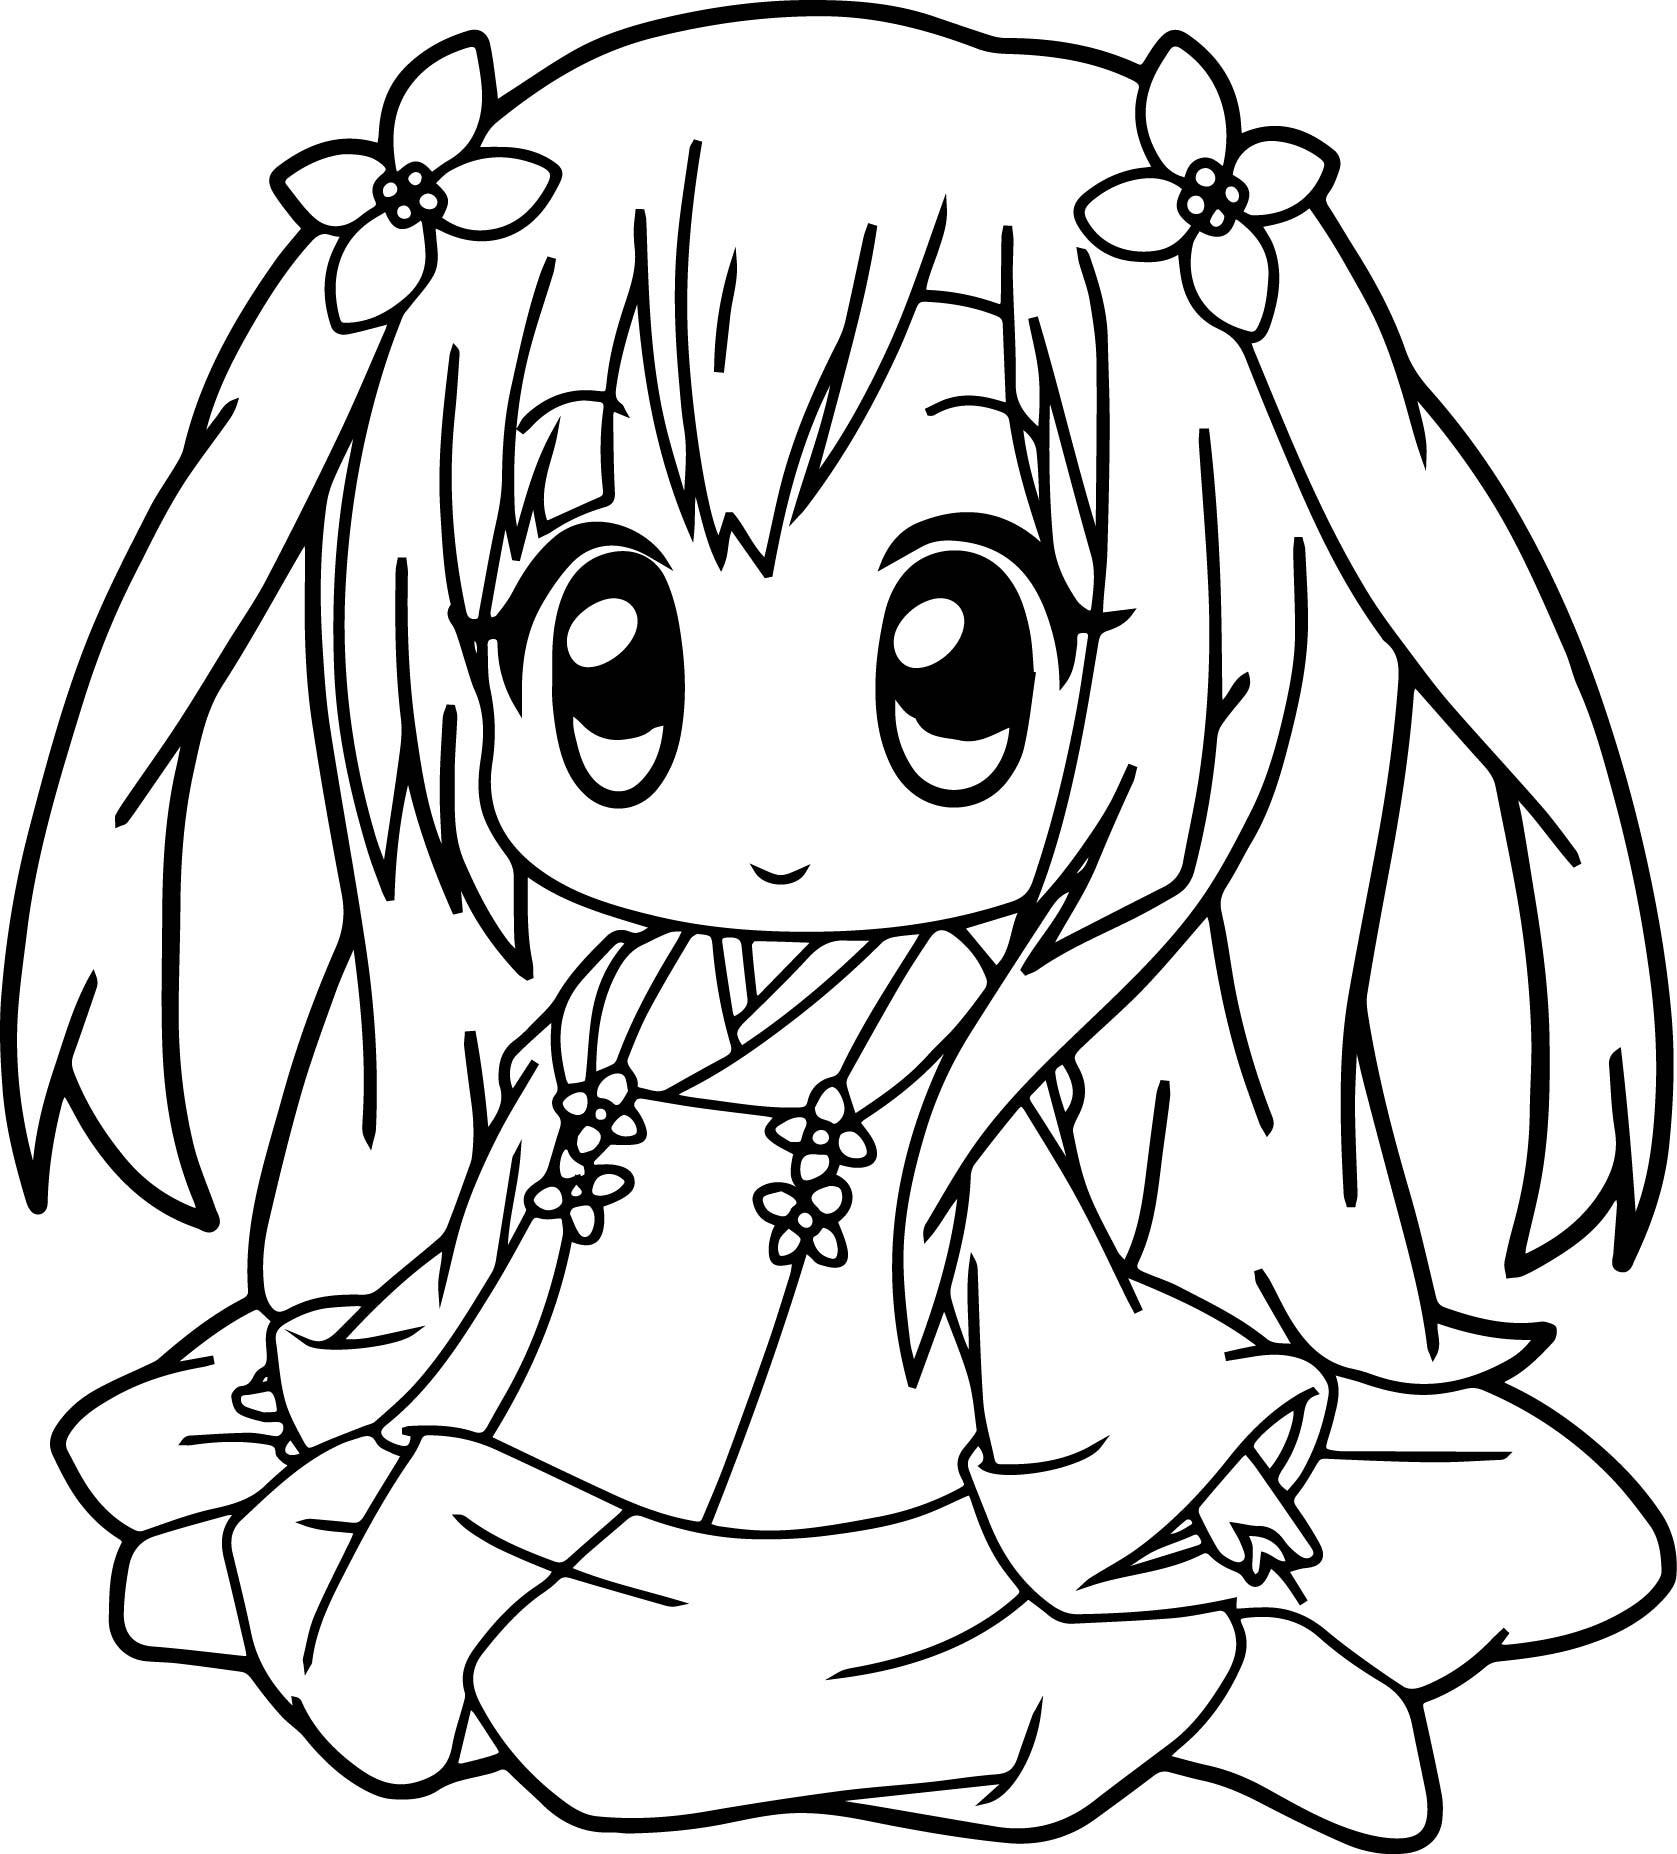 Anime Girl Coloring Sheet
 Anime Girl Coloring Pages coloringsuite